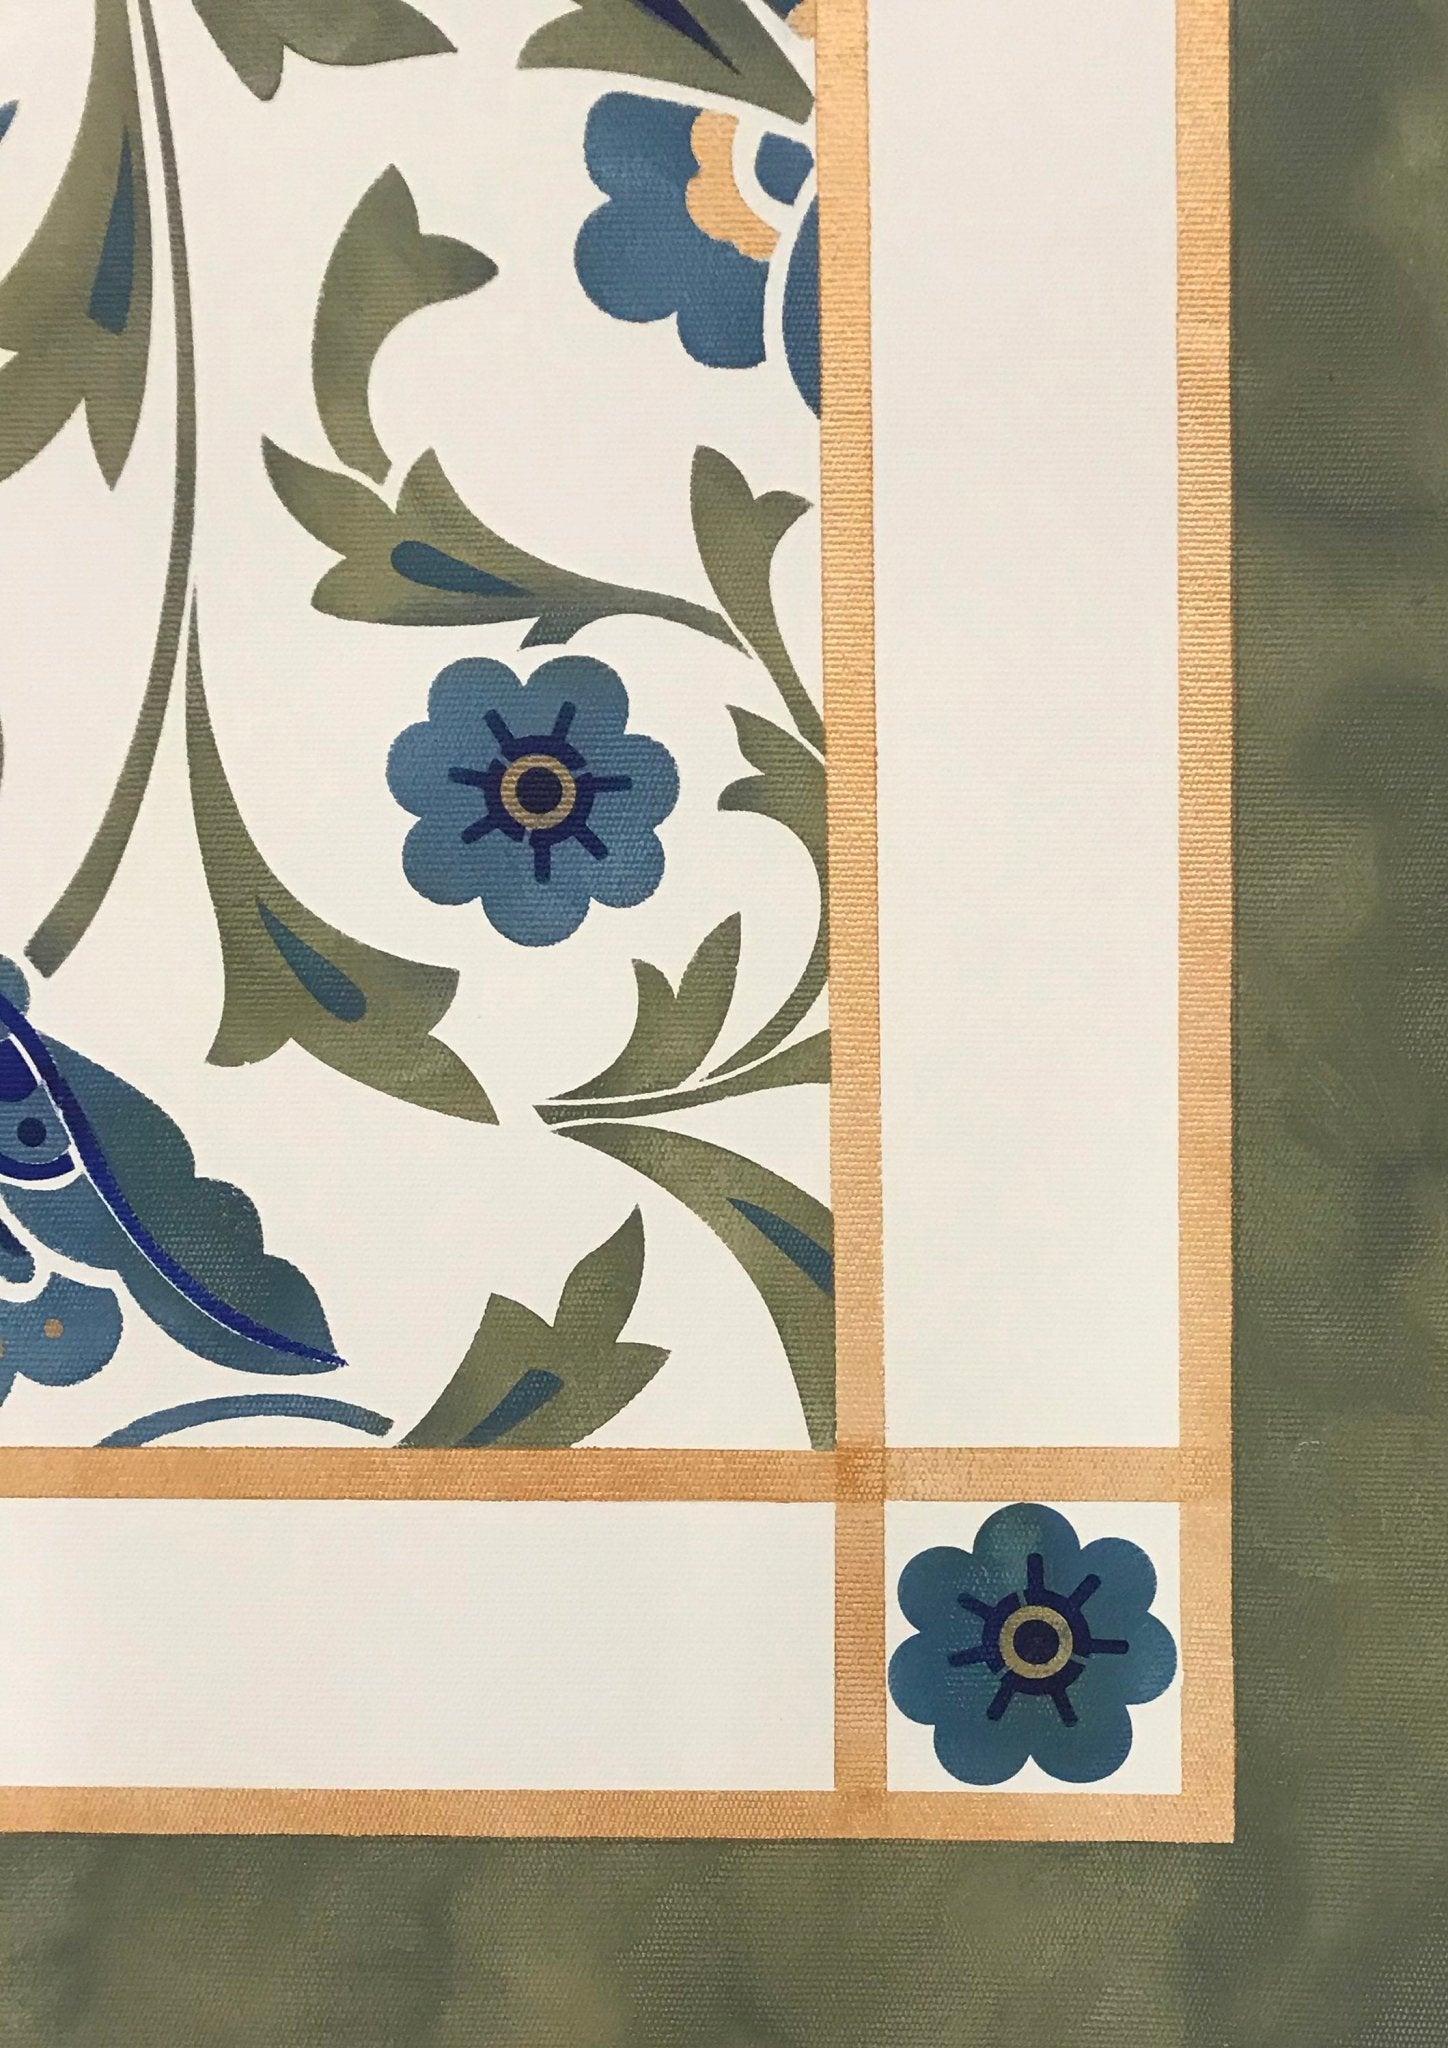 A close-up of the corner of this floorcloth.